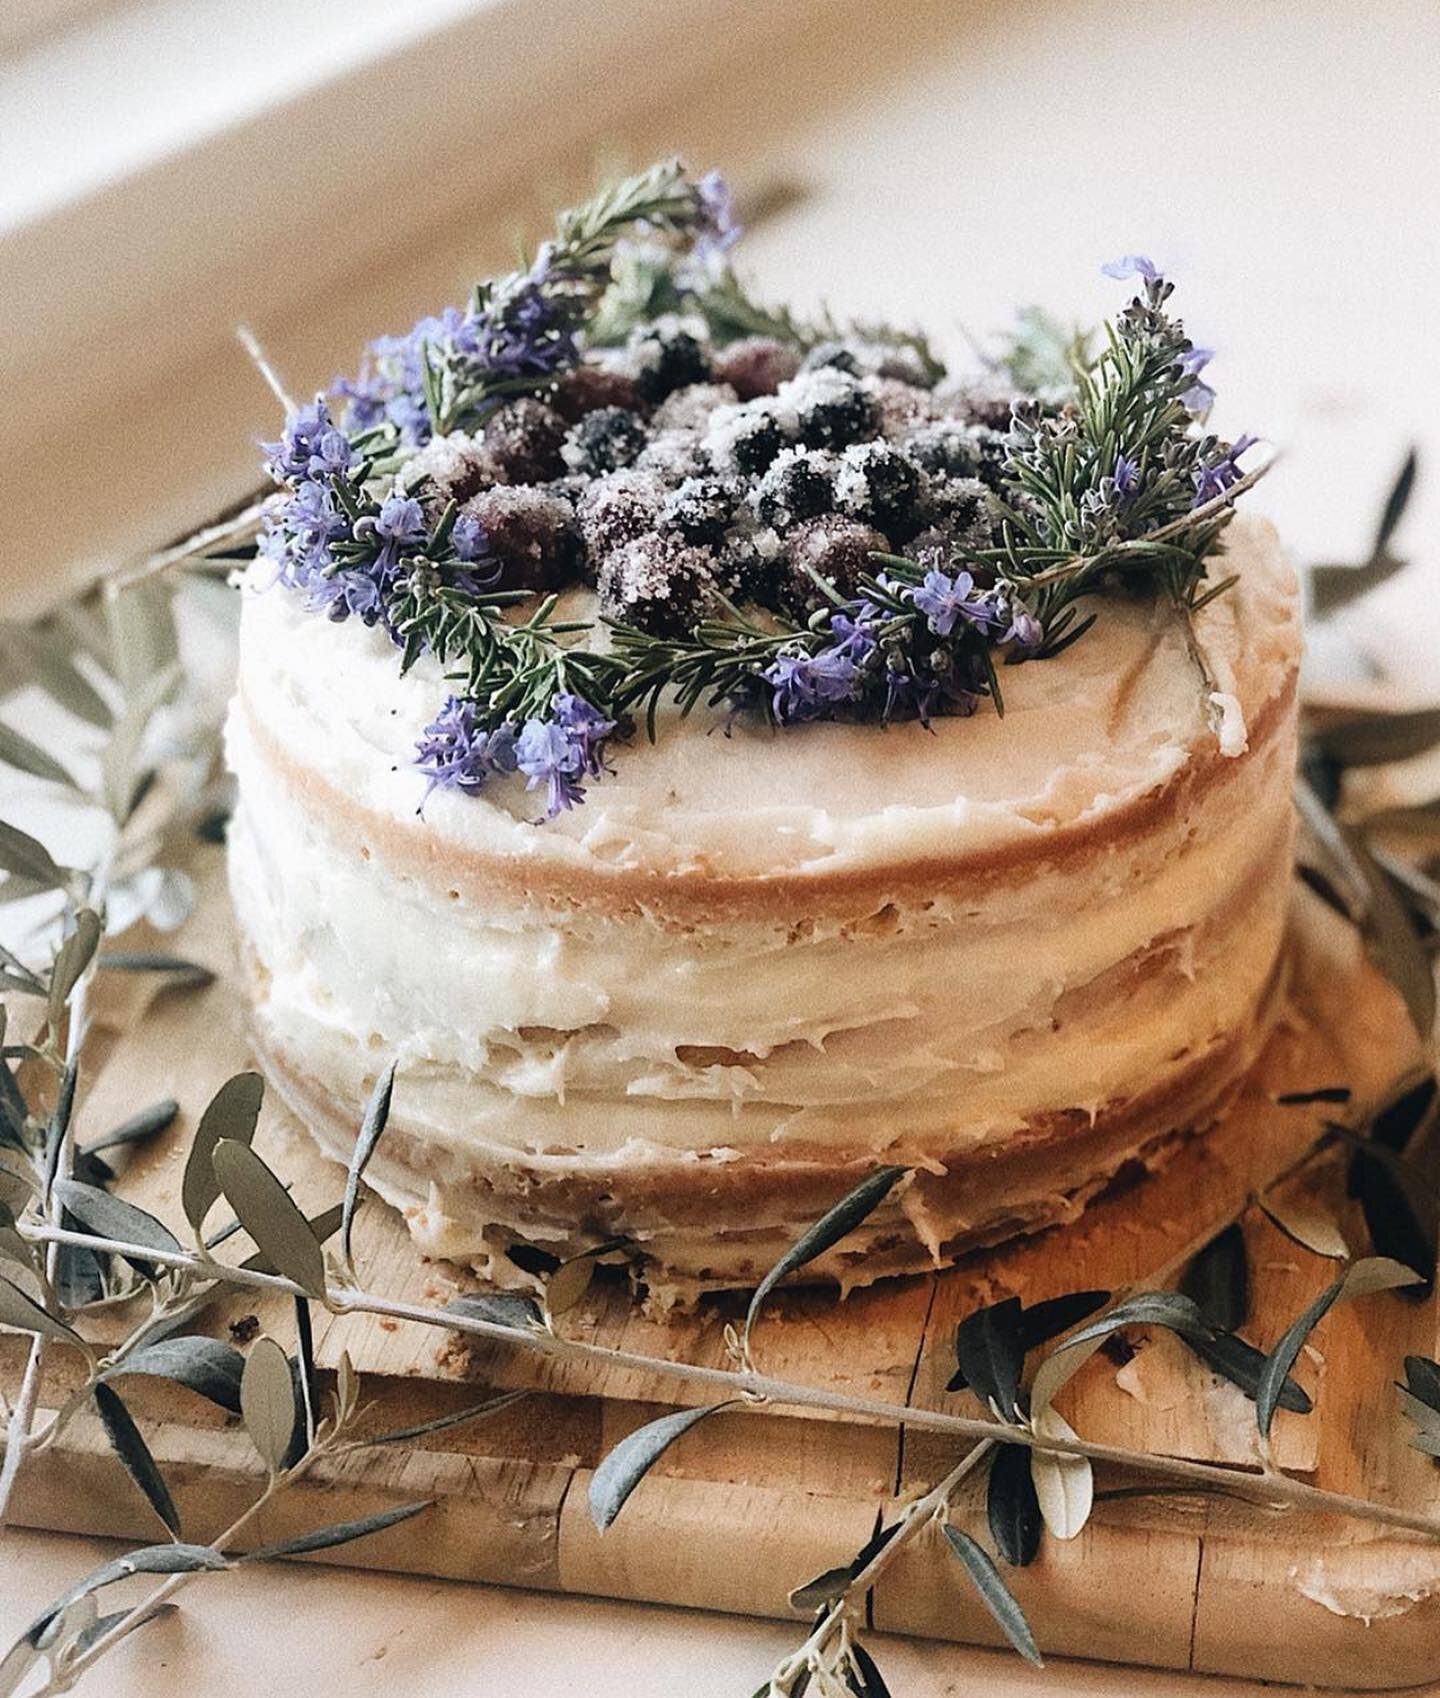 Tell me honestly - are you team chocolate or vanilla? 

Haven't baked anything pretty in awhile so I'm sharing one of my old favorites. Vanilla Overdose Naked Cake. And it's giving me all the warm weather vibes! I'm sooo ready for summer!